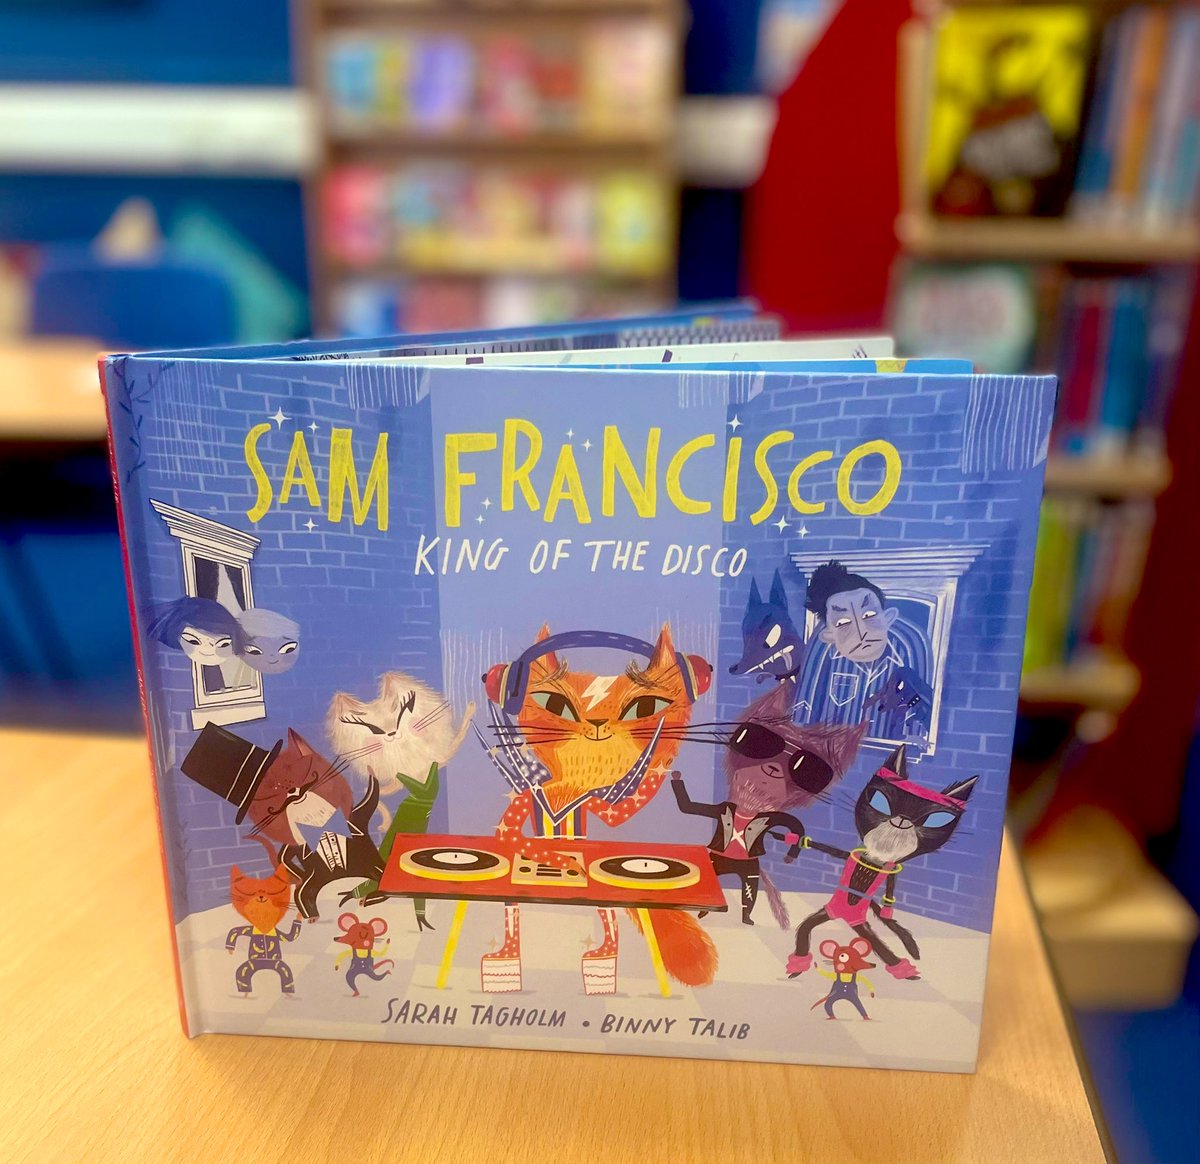 Reception and KS1 are still buzzing from last week’s visit by @mrstwit so this week we’ve read Sam Francisco at our storytime sessions. Those of us with cats are now wondering what our felines get up to overnight!